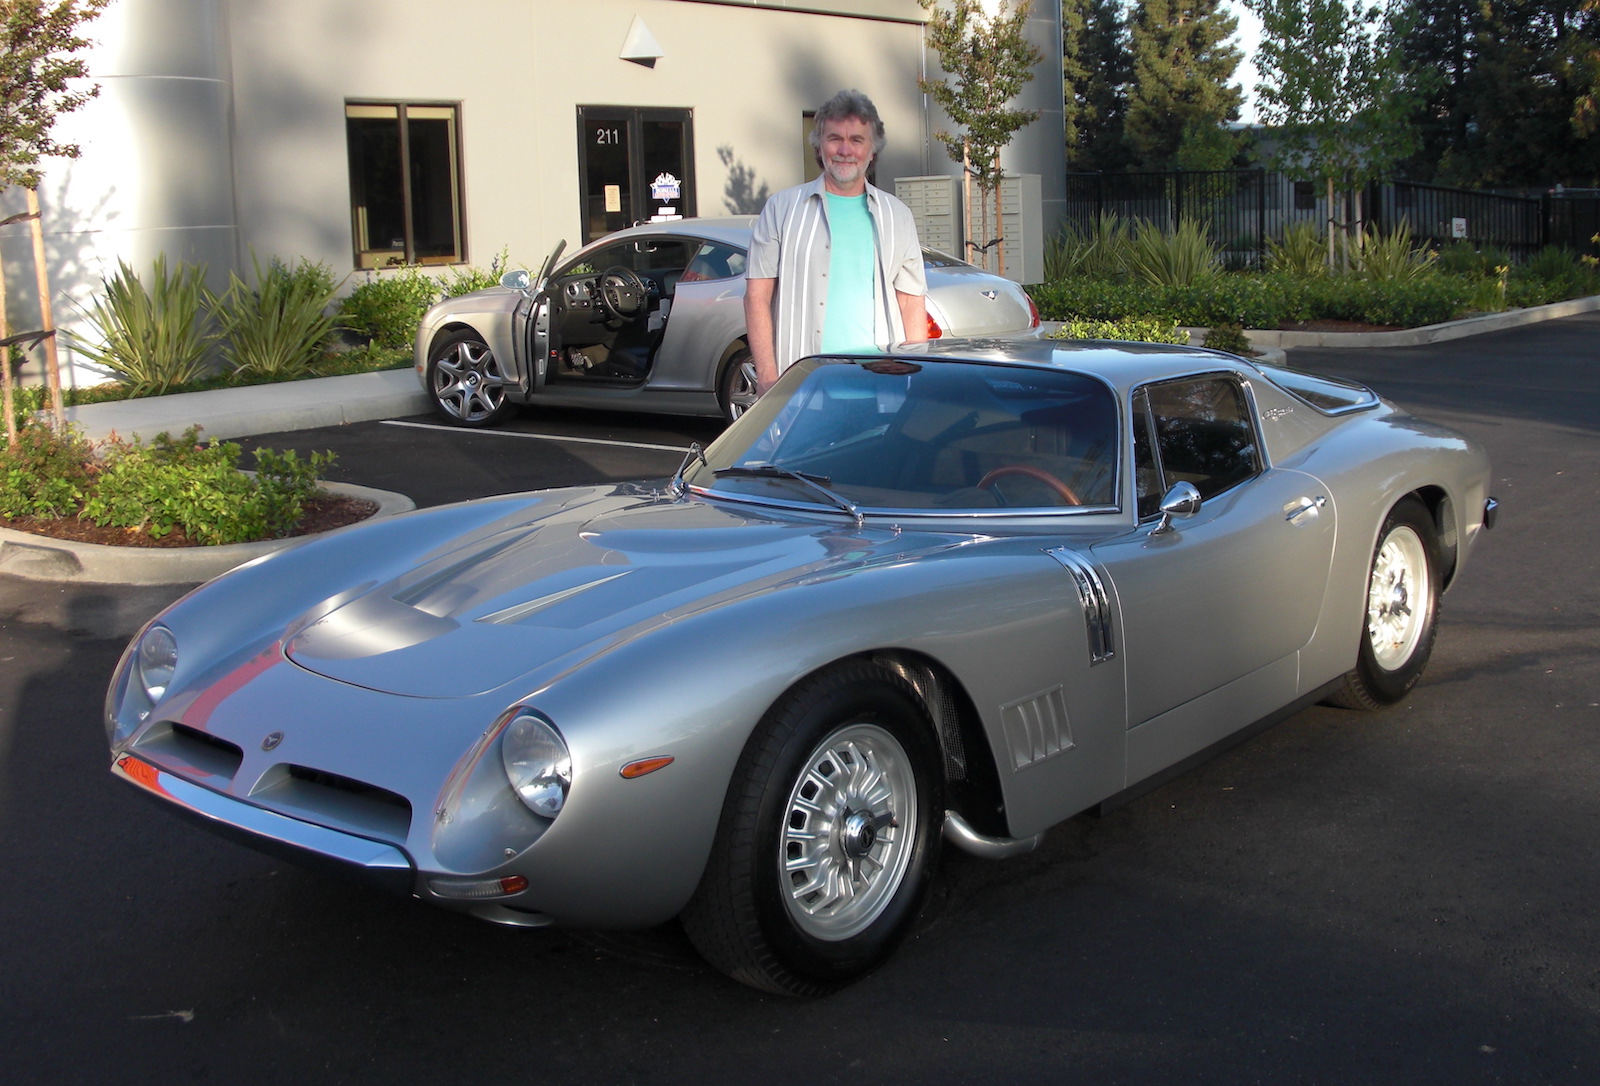 The Bizzarrini GT 5300 (Iso Grifo A3) Is Loved By All - Now